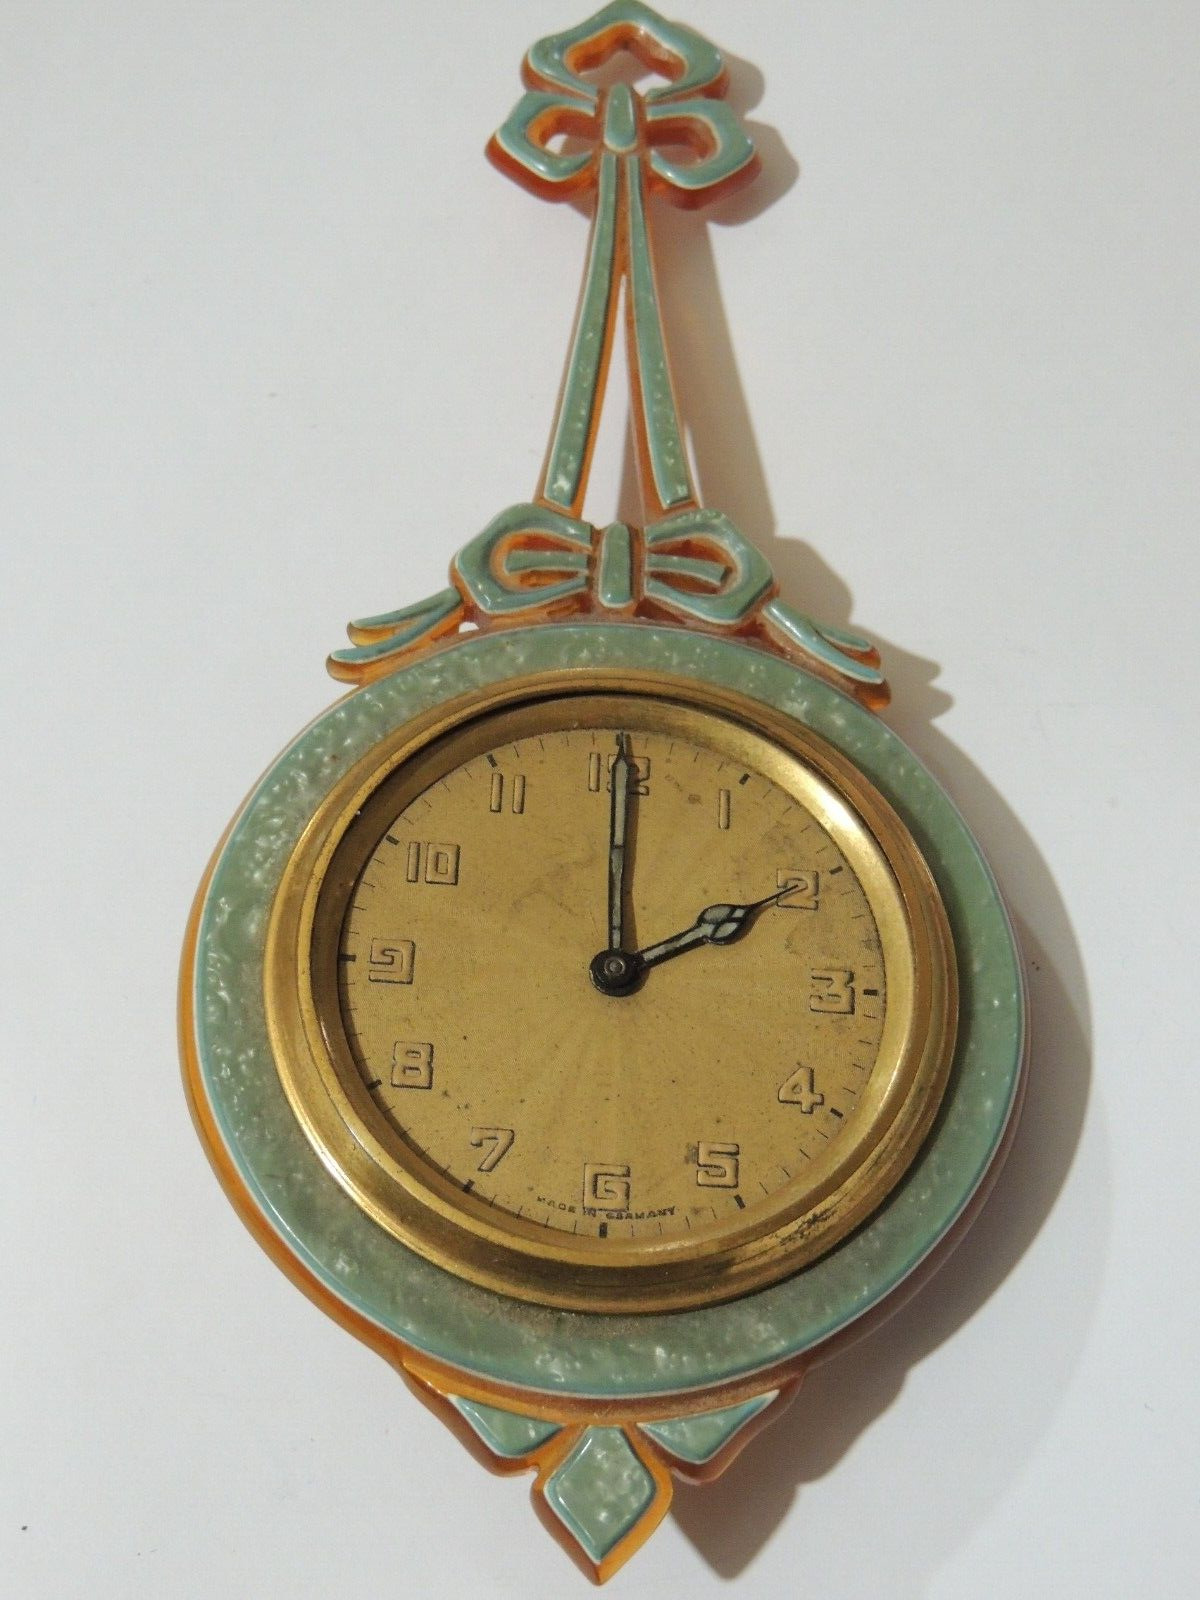 VINTAGE SMALL WINDUP HANGING KIENZLE GERMAN CLOCK WITH CELLULOID SURROUND WORKS